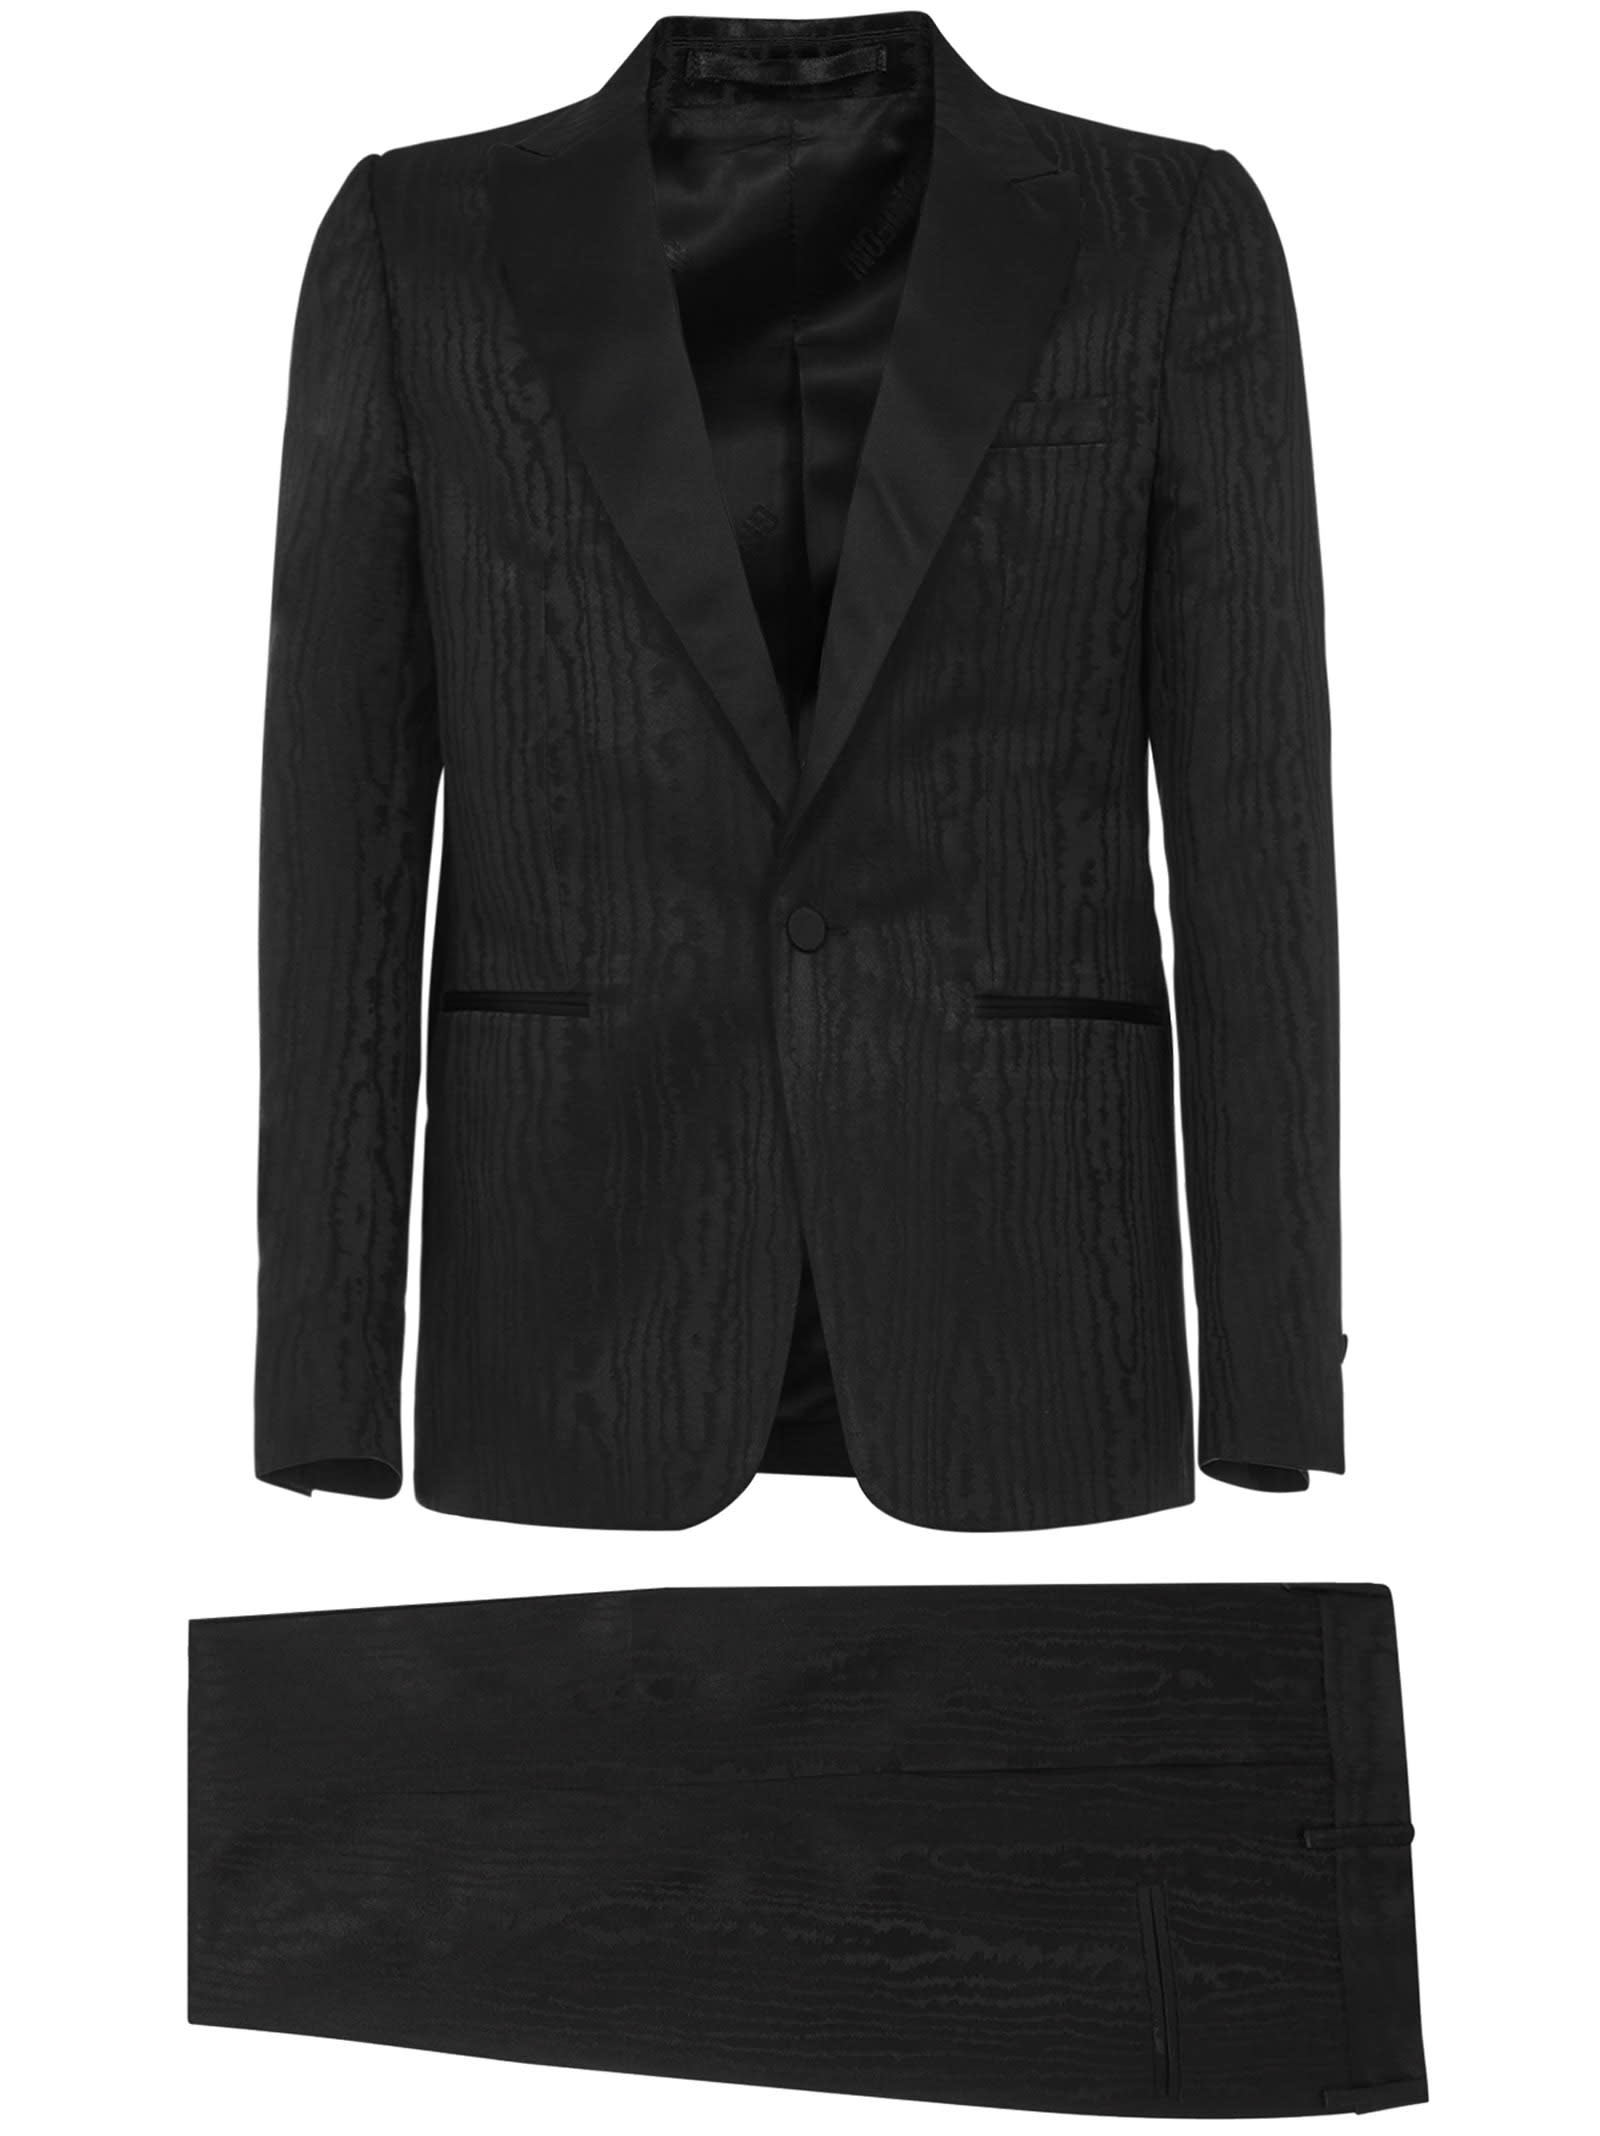 Mauro Grifoni Grifoni Suit In Black